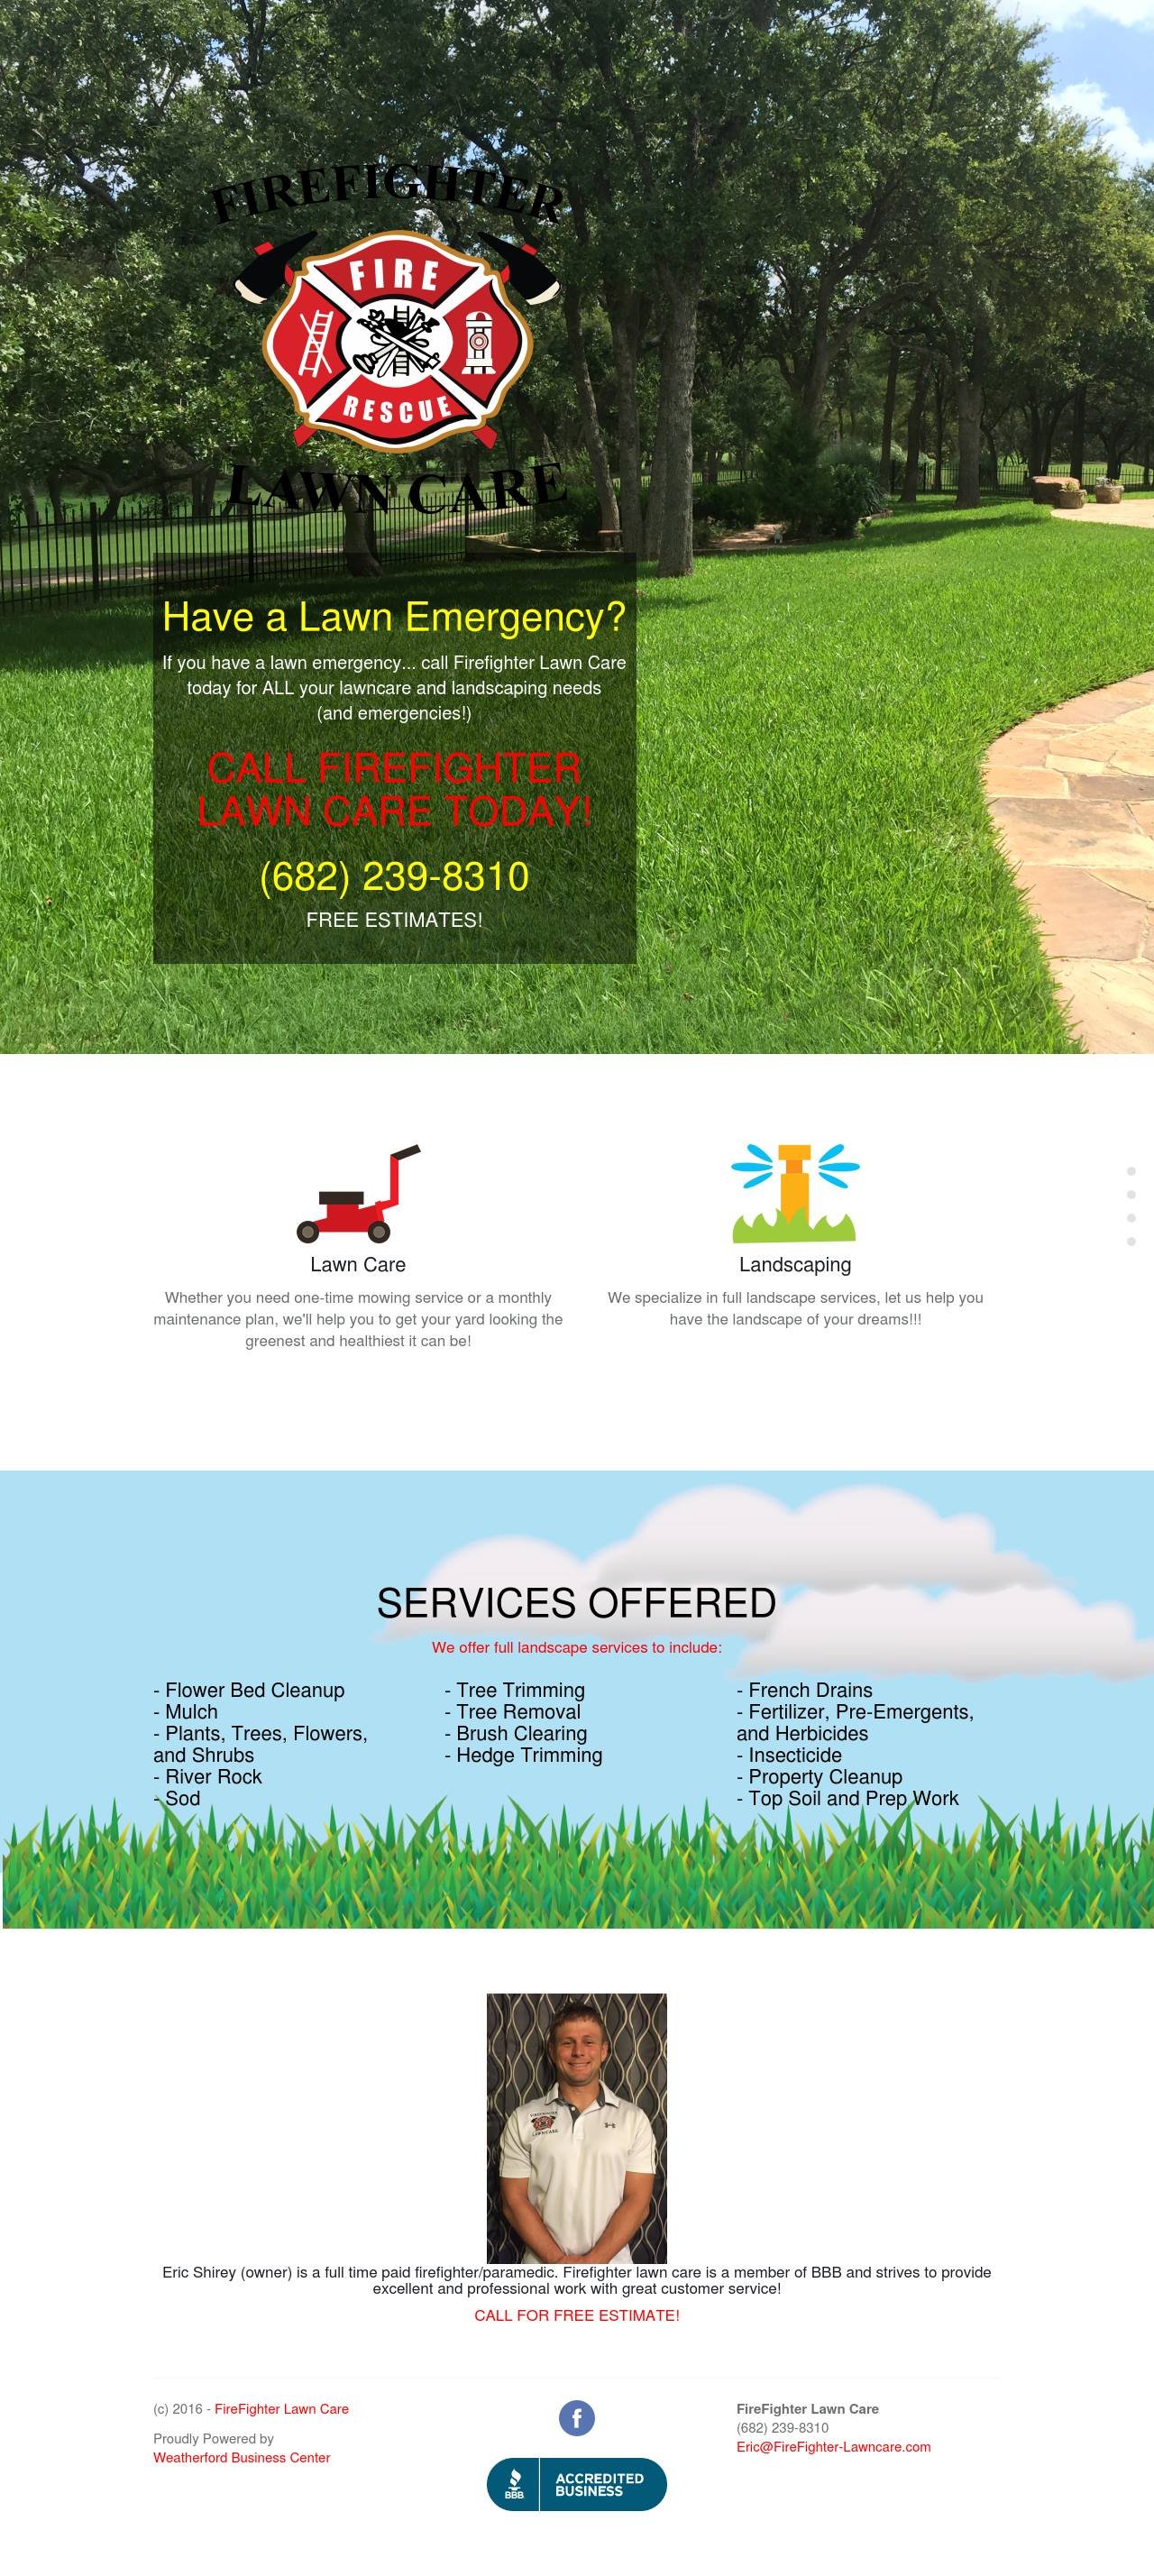 Firefighter Lawn Care landing page